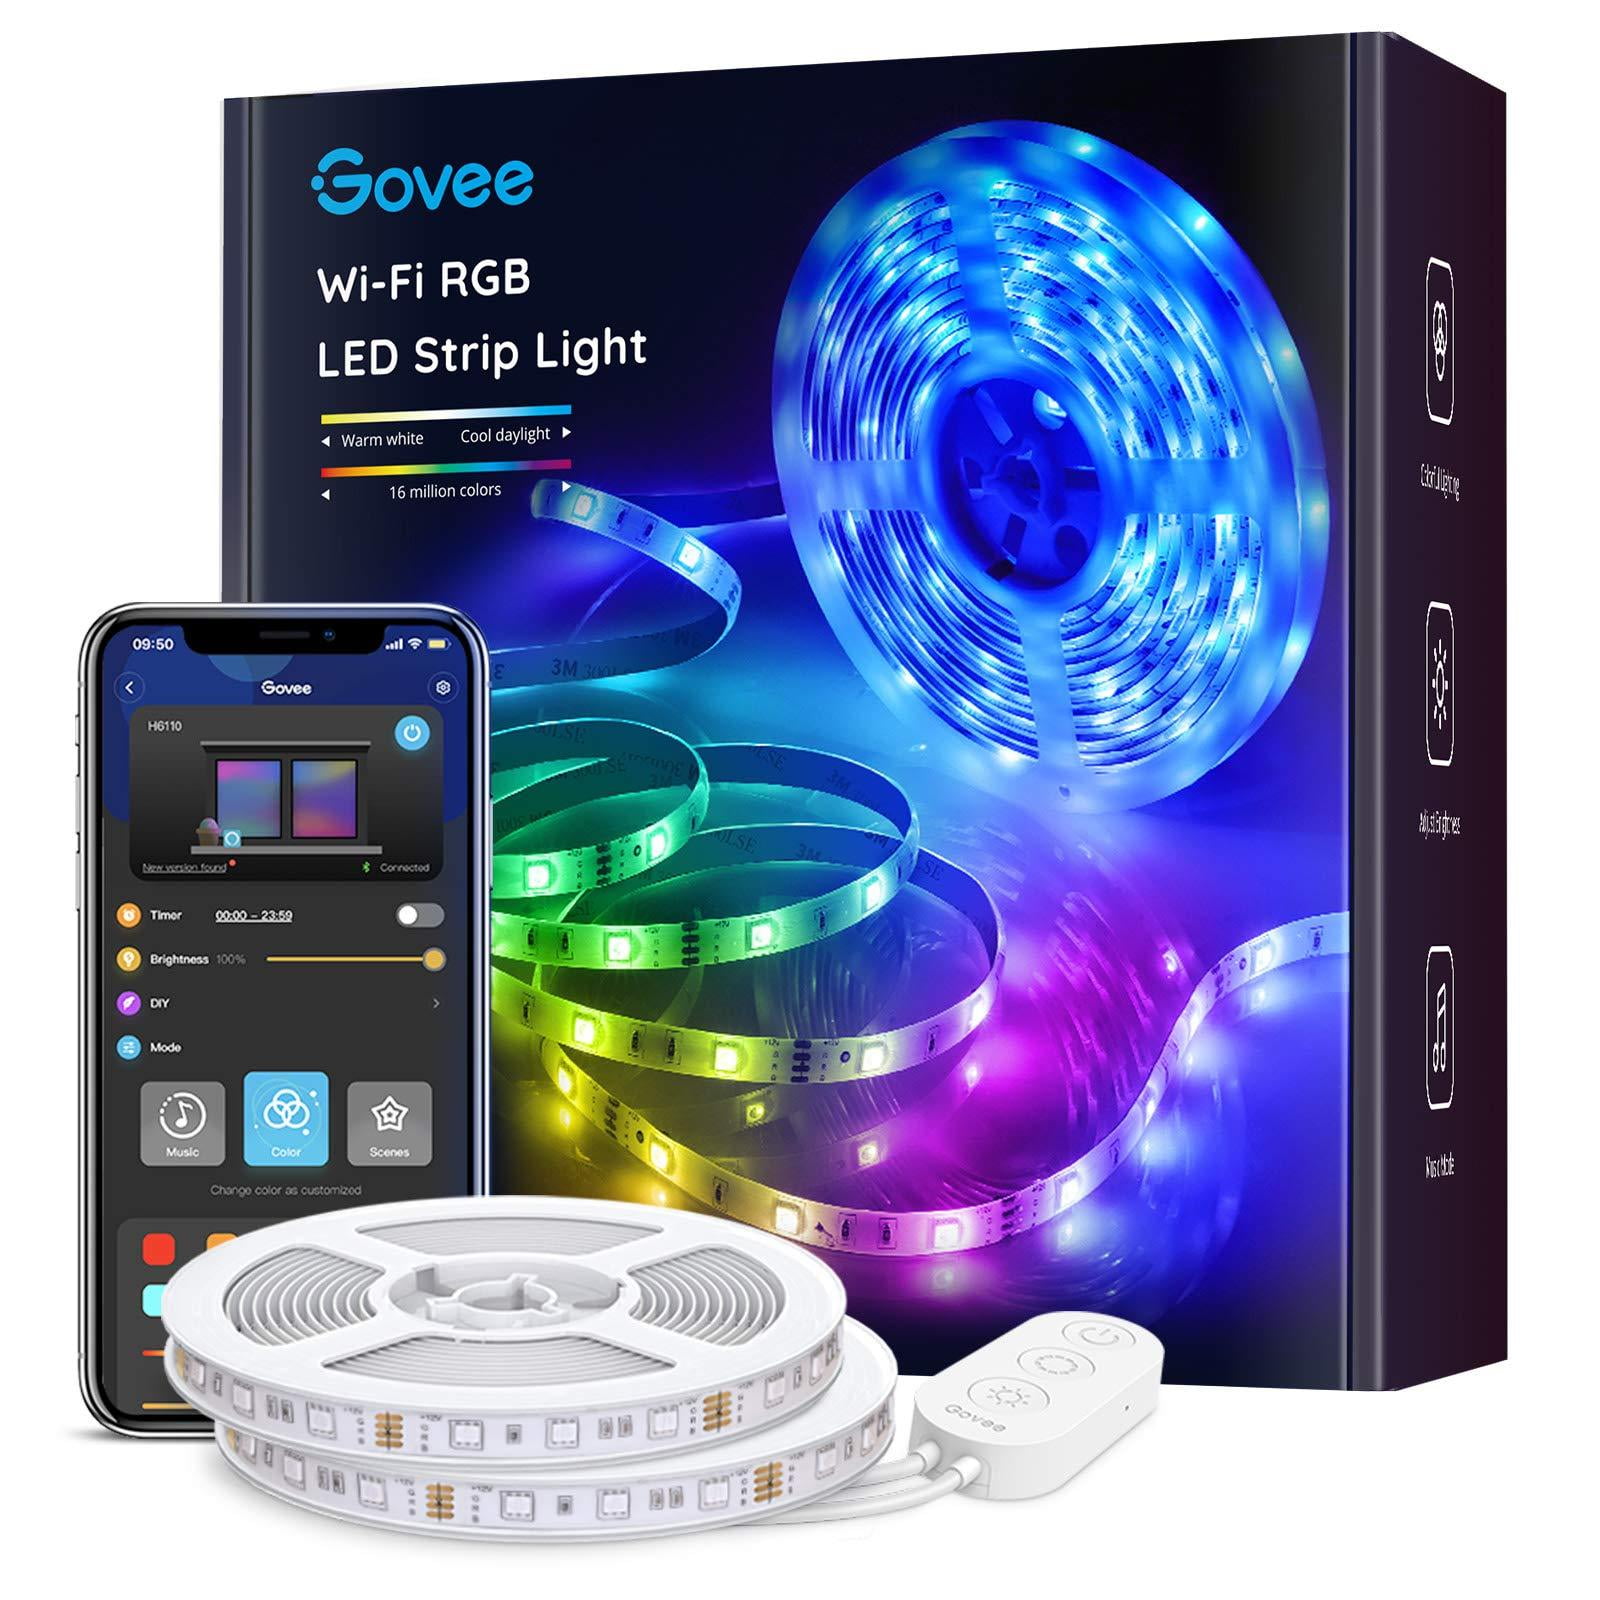 Govee Smart LED Strip Lights, 16.4ft WiFi LED Lights Work with Alexa and  Google Assistant, Bright 5050 LEDs, 16 Million Colors with App Control and